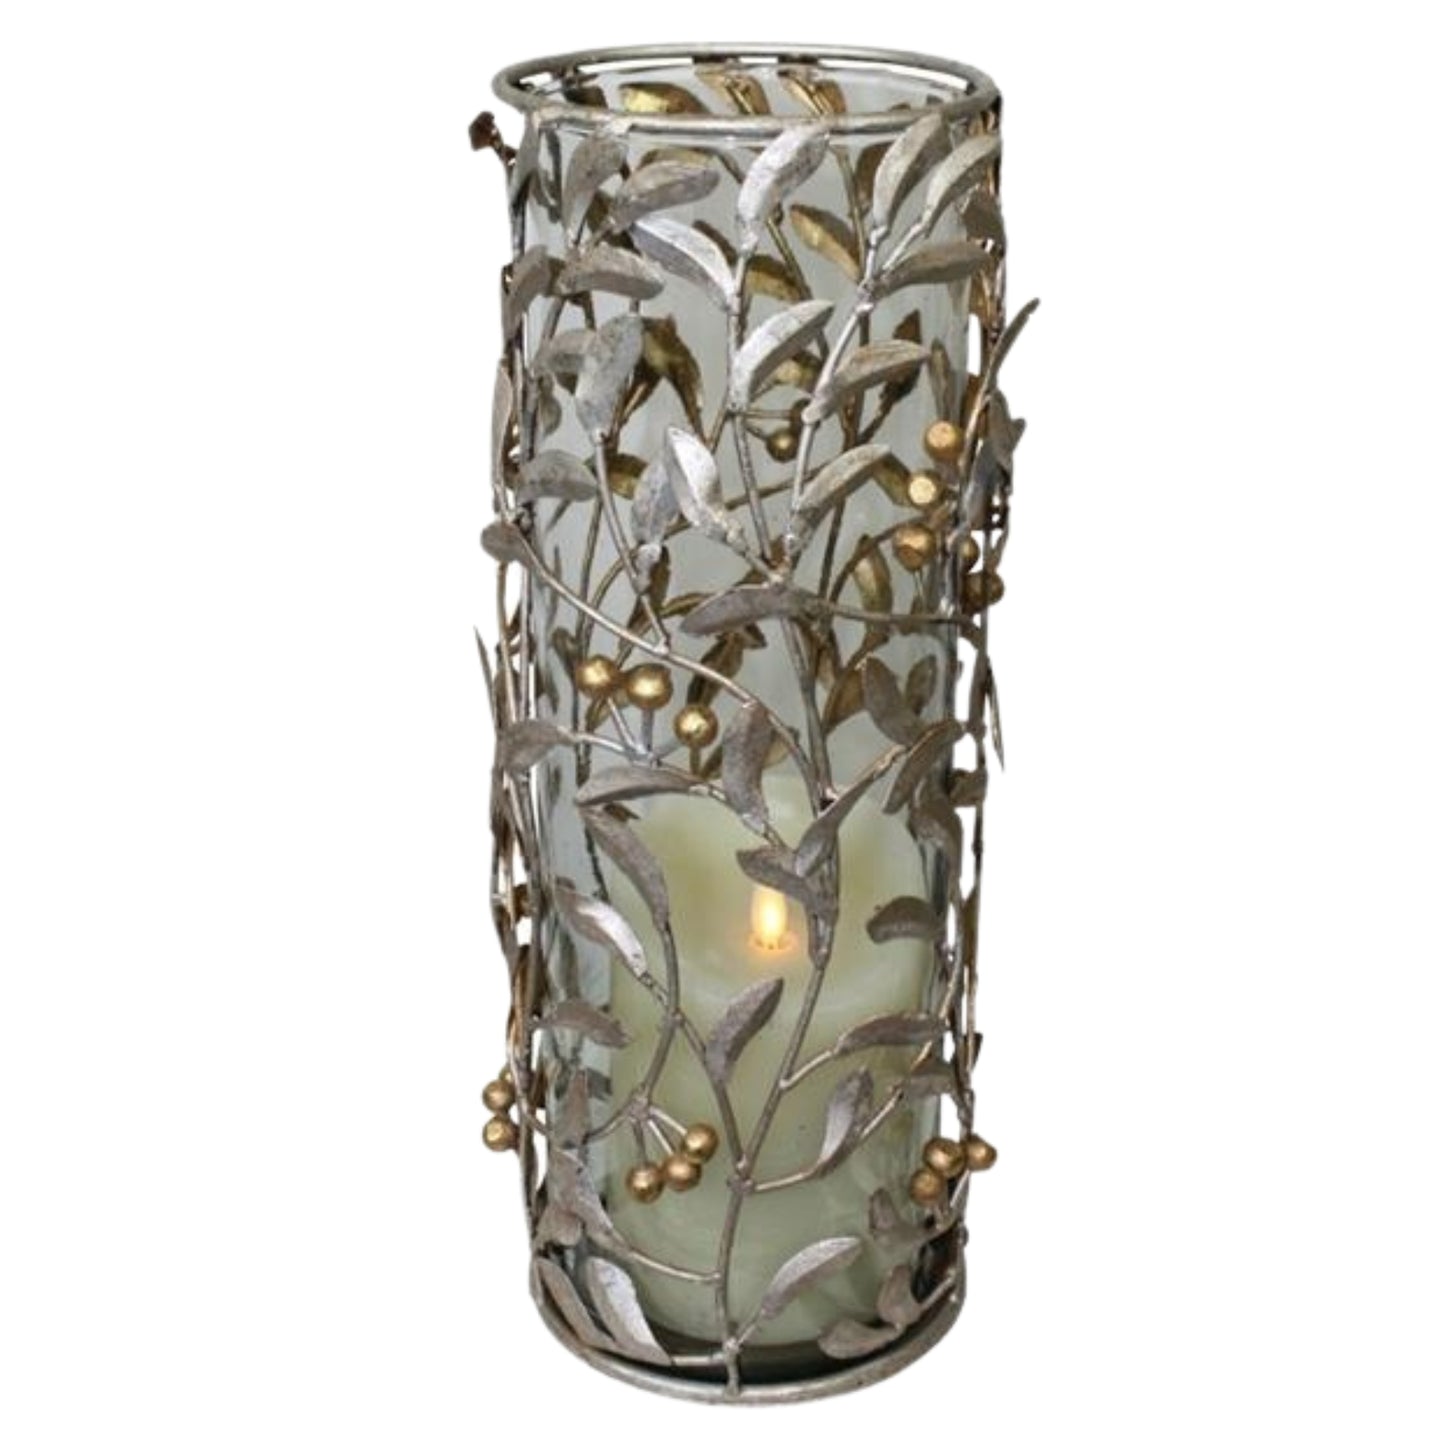 Silver and Gold Iron Hurricanes - Leaf & Berry Accented Iron & Glass Candle Holders - 3 Sizes to Choose From | Large Iron Candle Holder Shown | INSIDE OUT | InsideOutCatalog.com